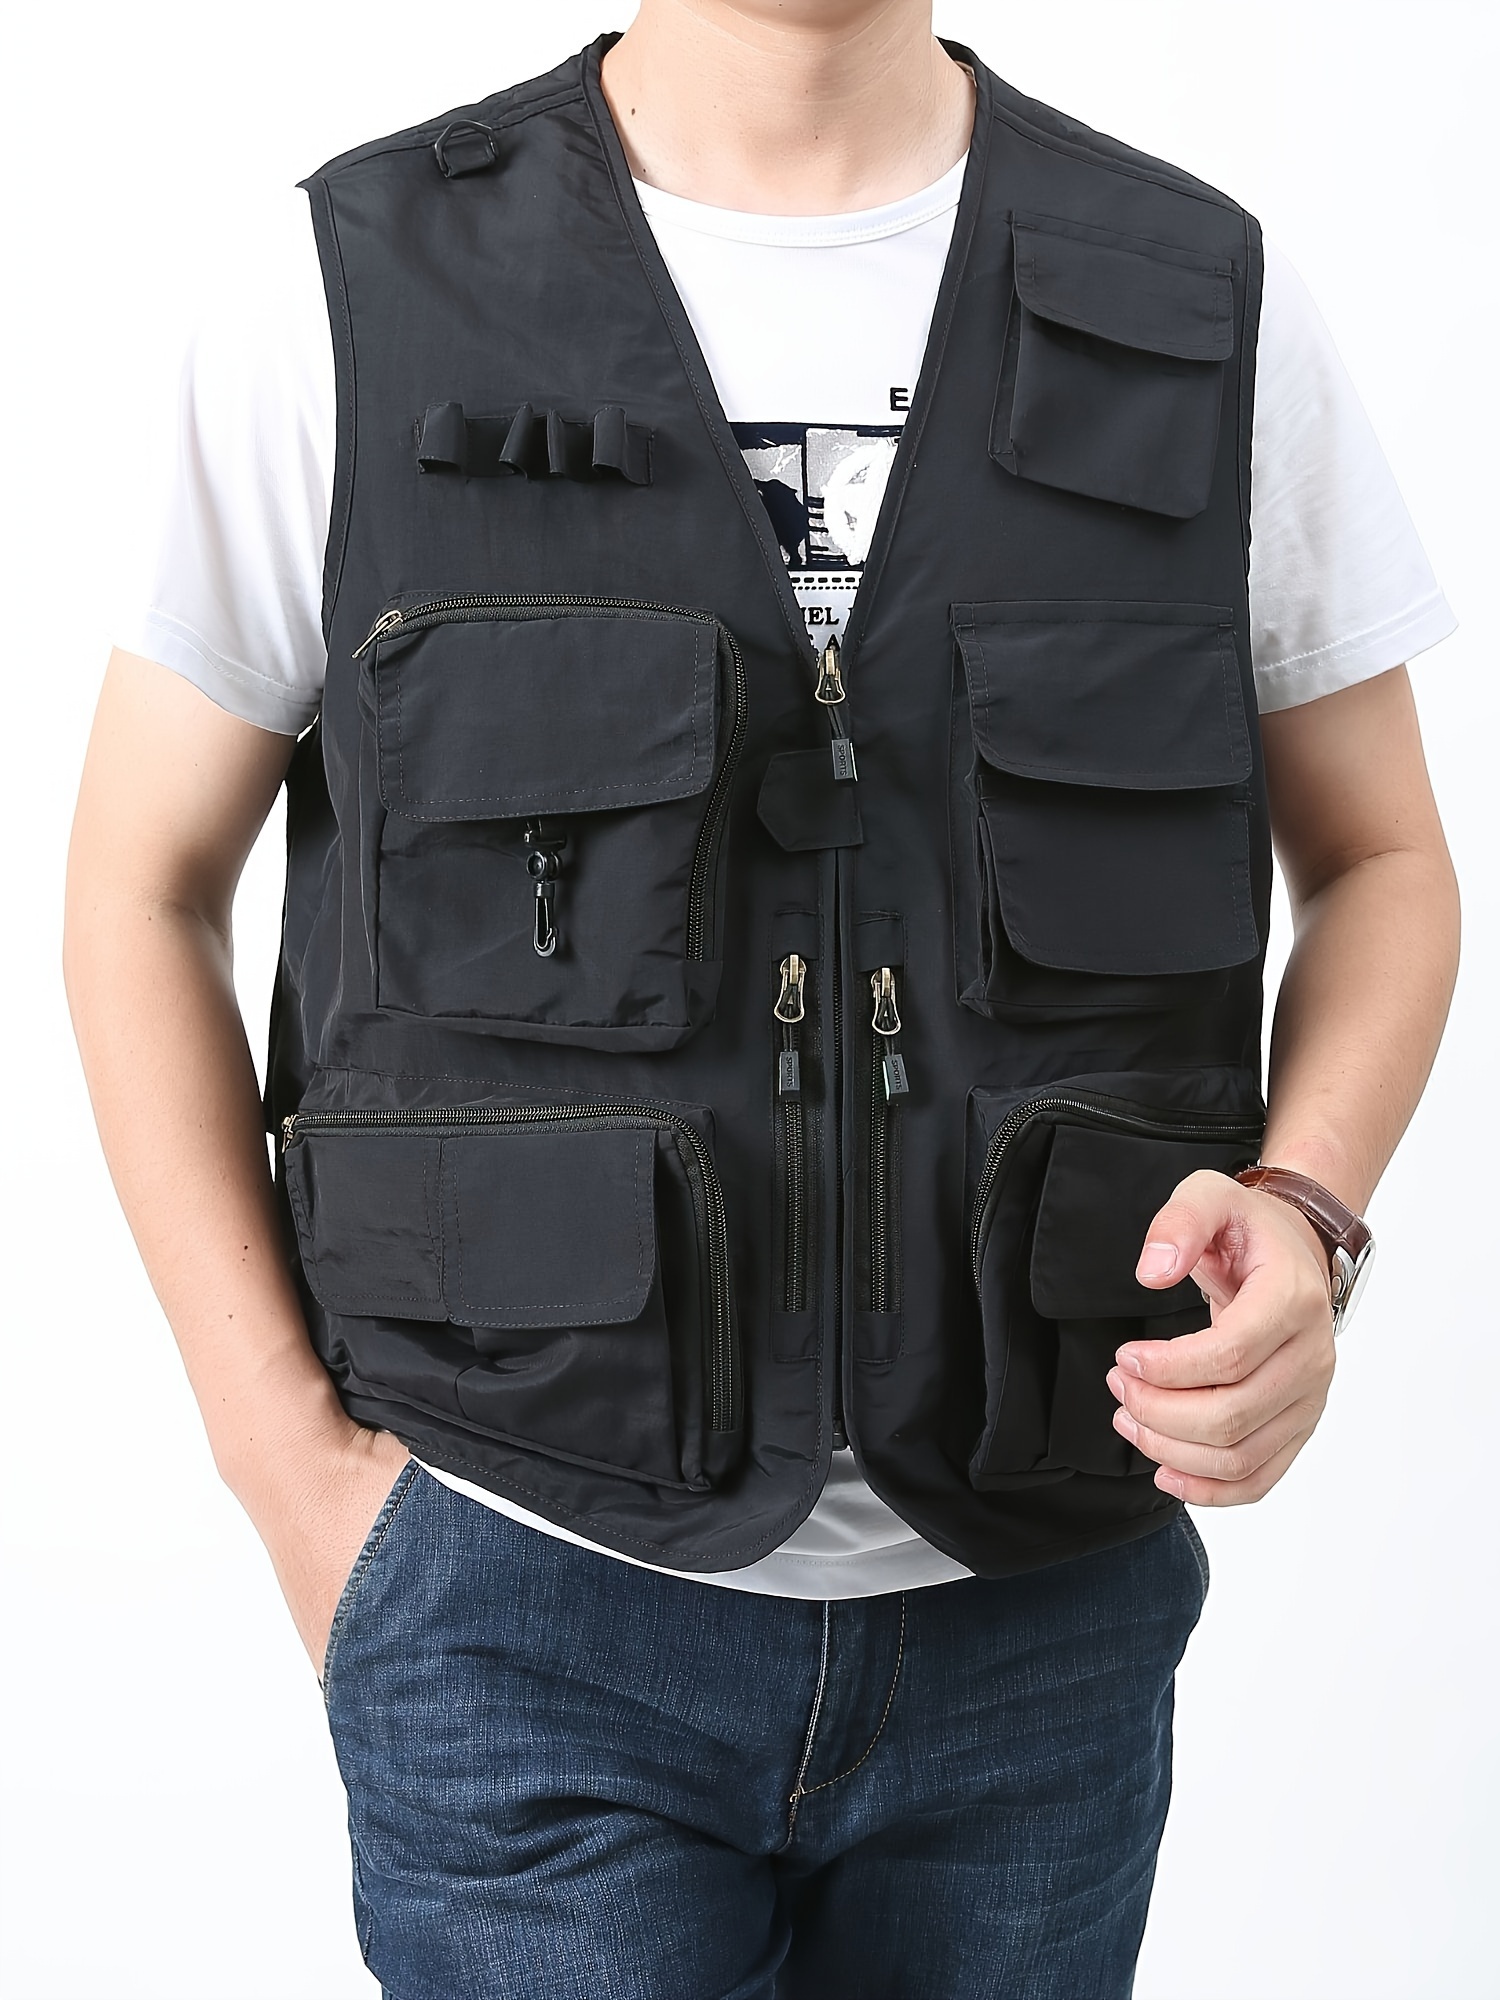 Tactical Vest For Camping, Hunting, Fishing Stab Proof Waistcoat